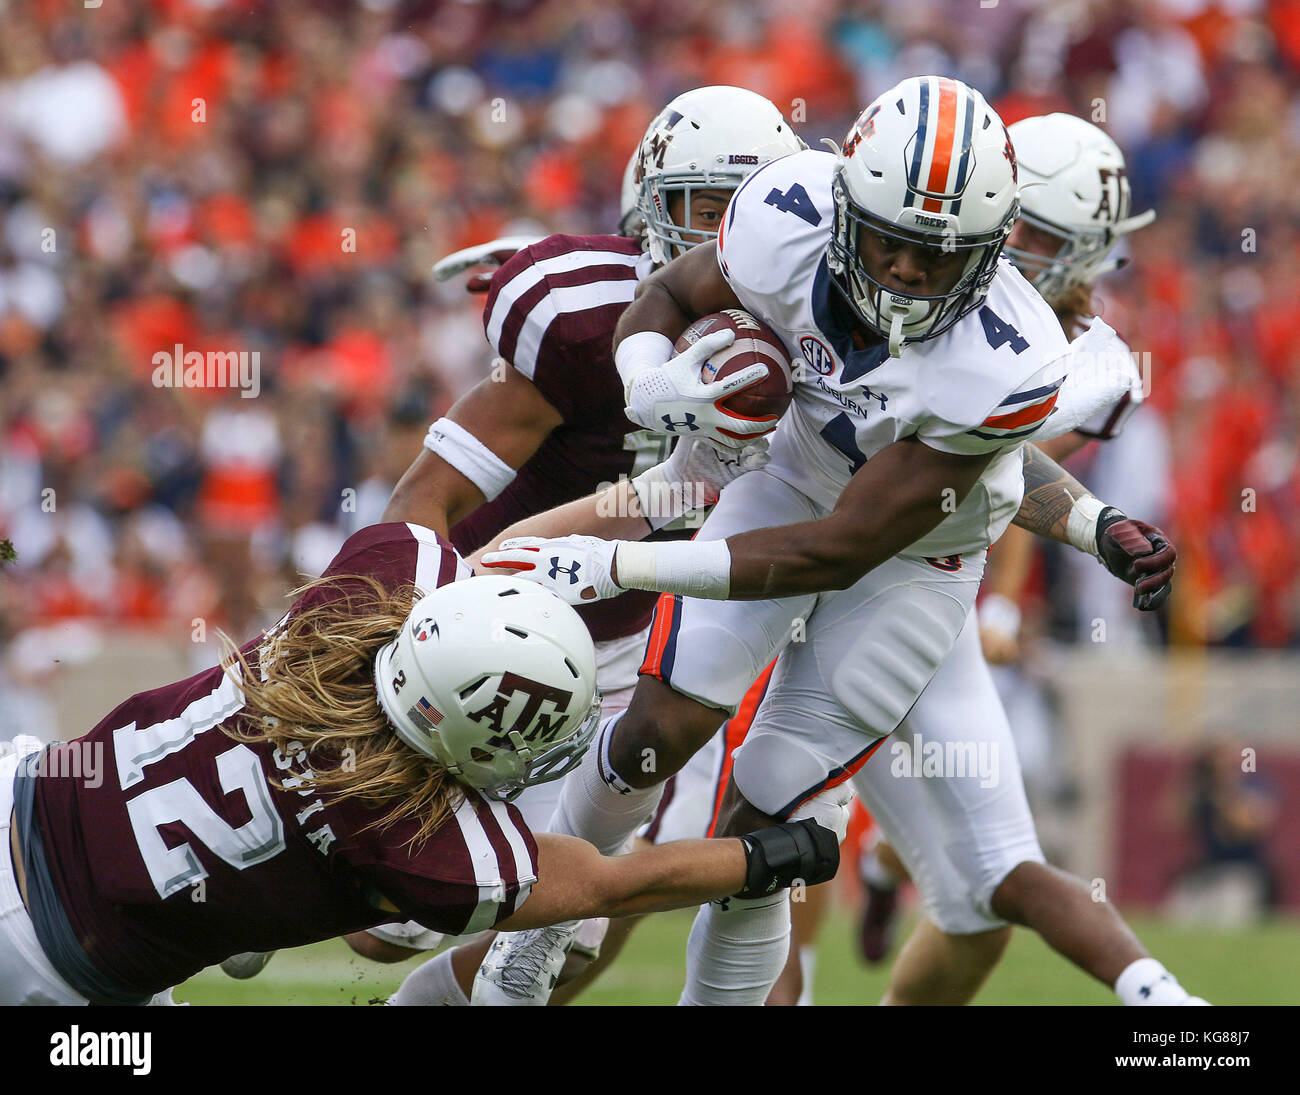 November 4, 2017: Auburn Tigers wide receiver Noah Igbinoghene (4) rushes for yards and is brought down by Texas A&M Aggies linebacker Cullen Gillaspia (12) in the third quarter during the NCAA football game between the Auburn Tigers and the Texas A&M Aggies at Kyle Field in College Station, TX; John Glaser/CSM. Stock Photo